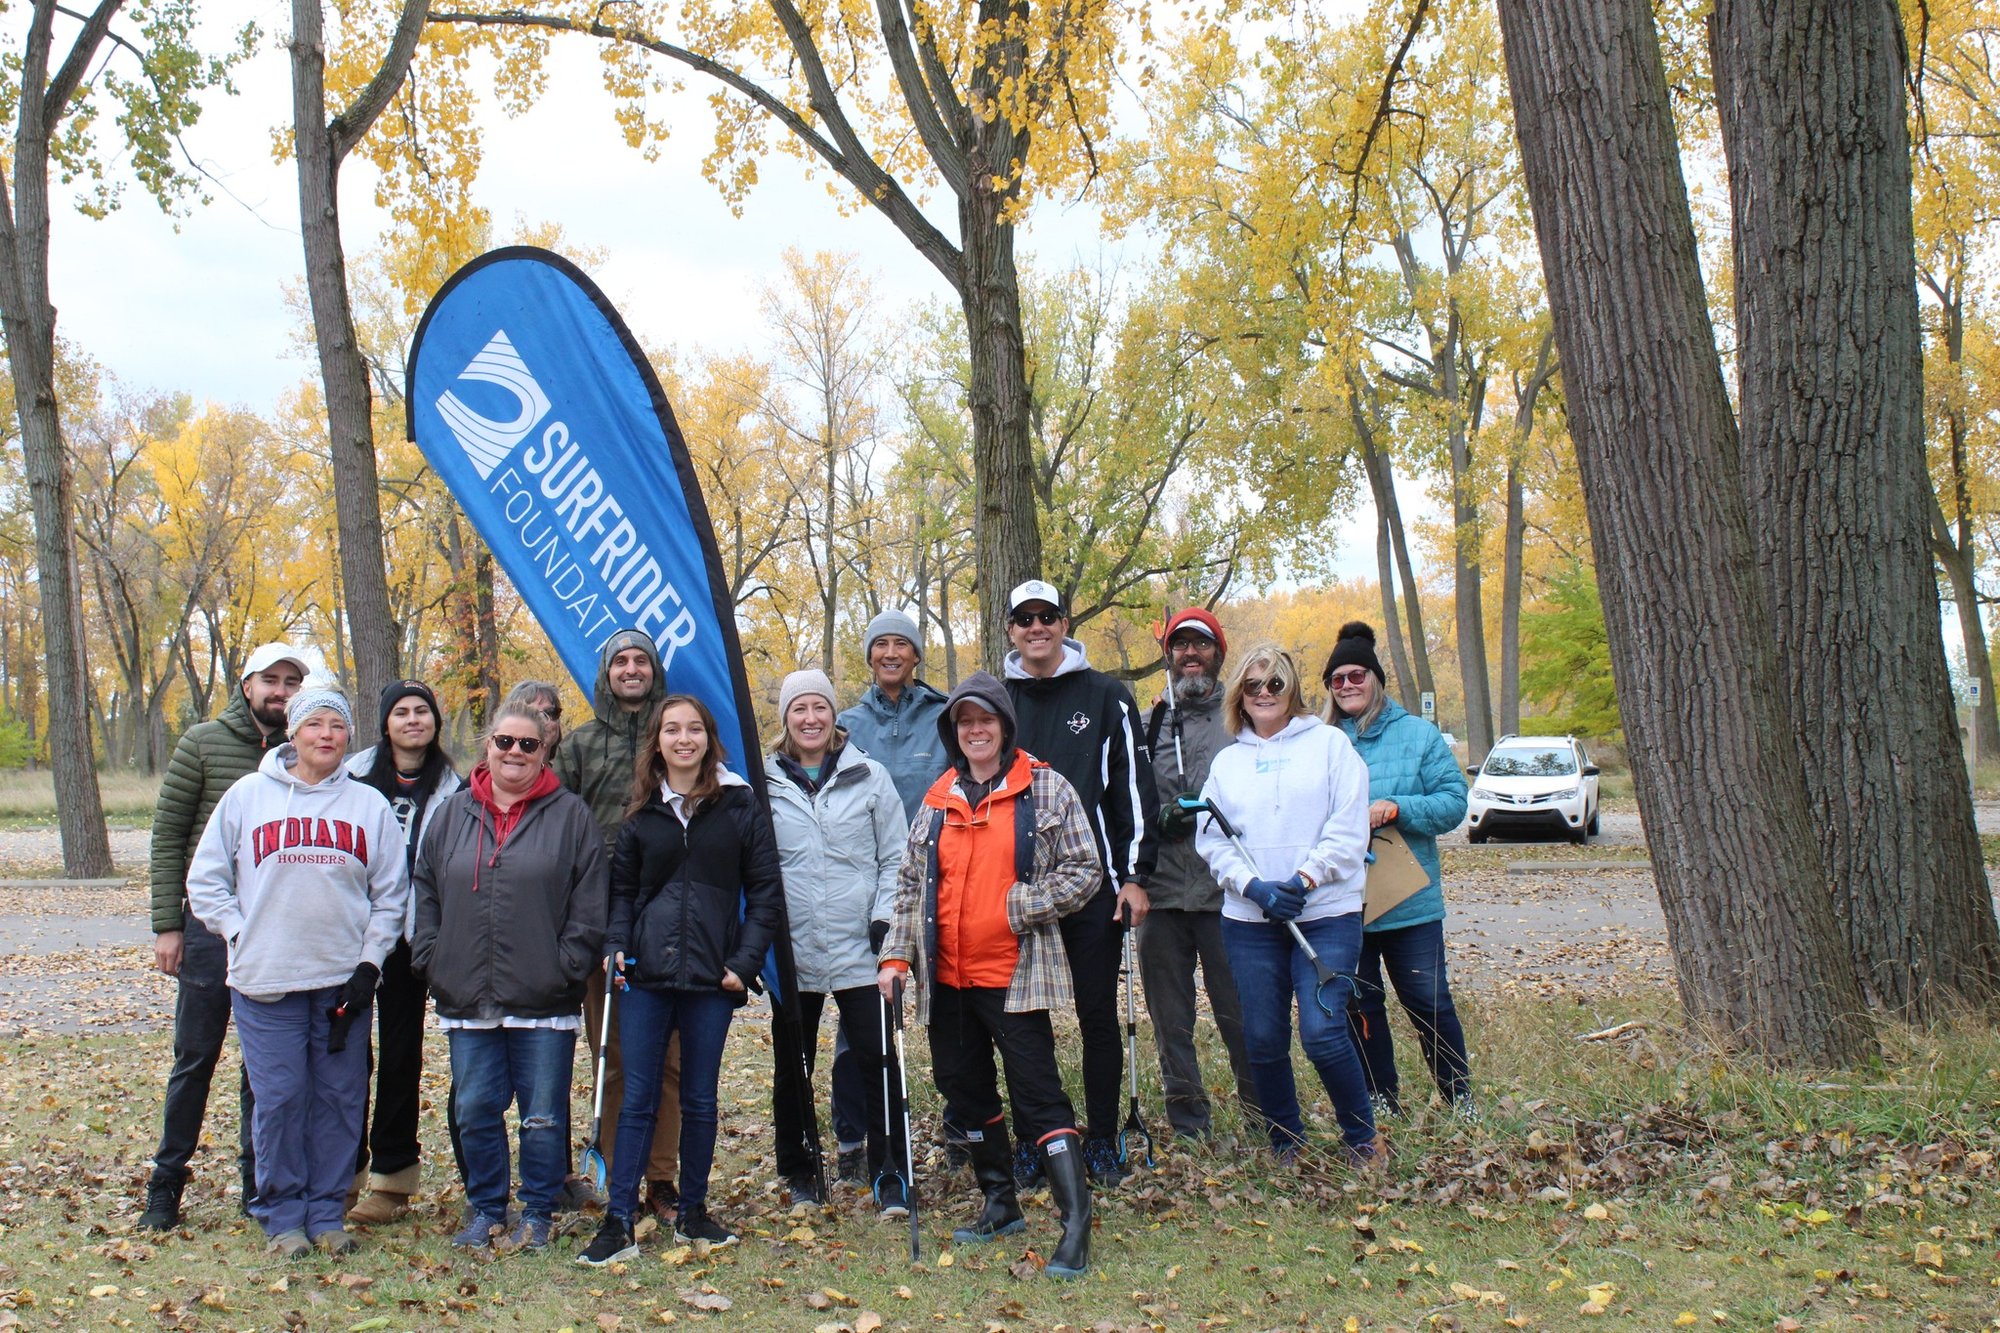 The Surfrider Foundation Team at a Beach Cleanup in Mentor Ohio